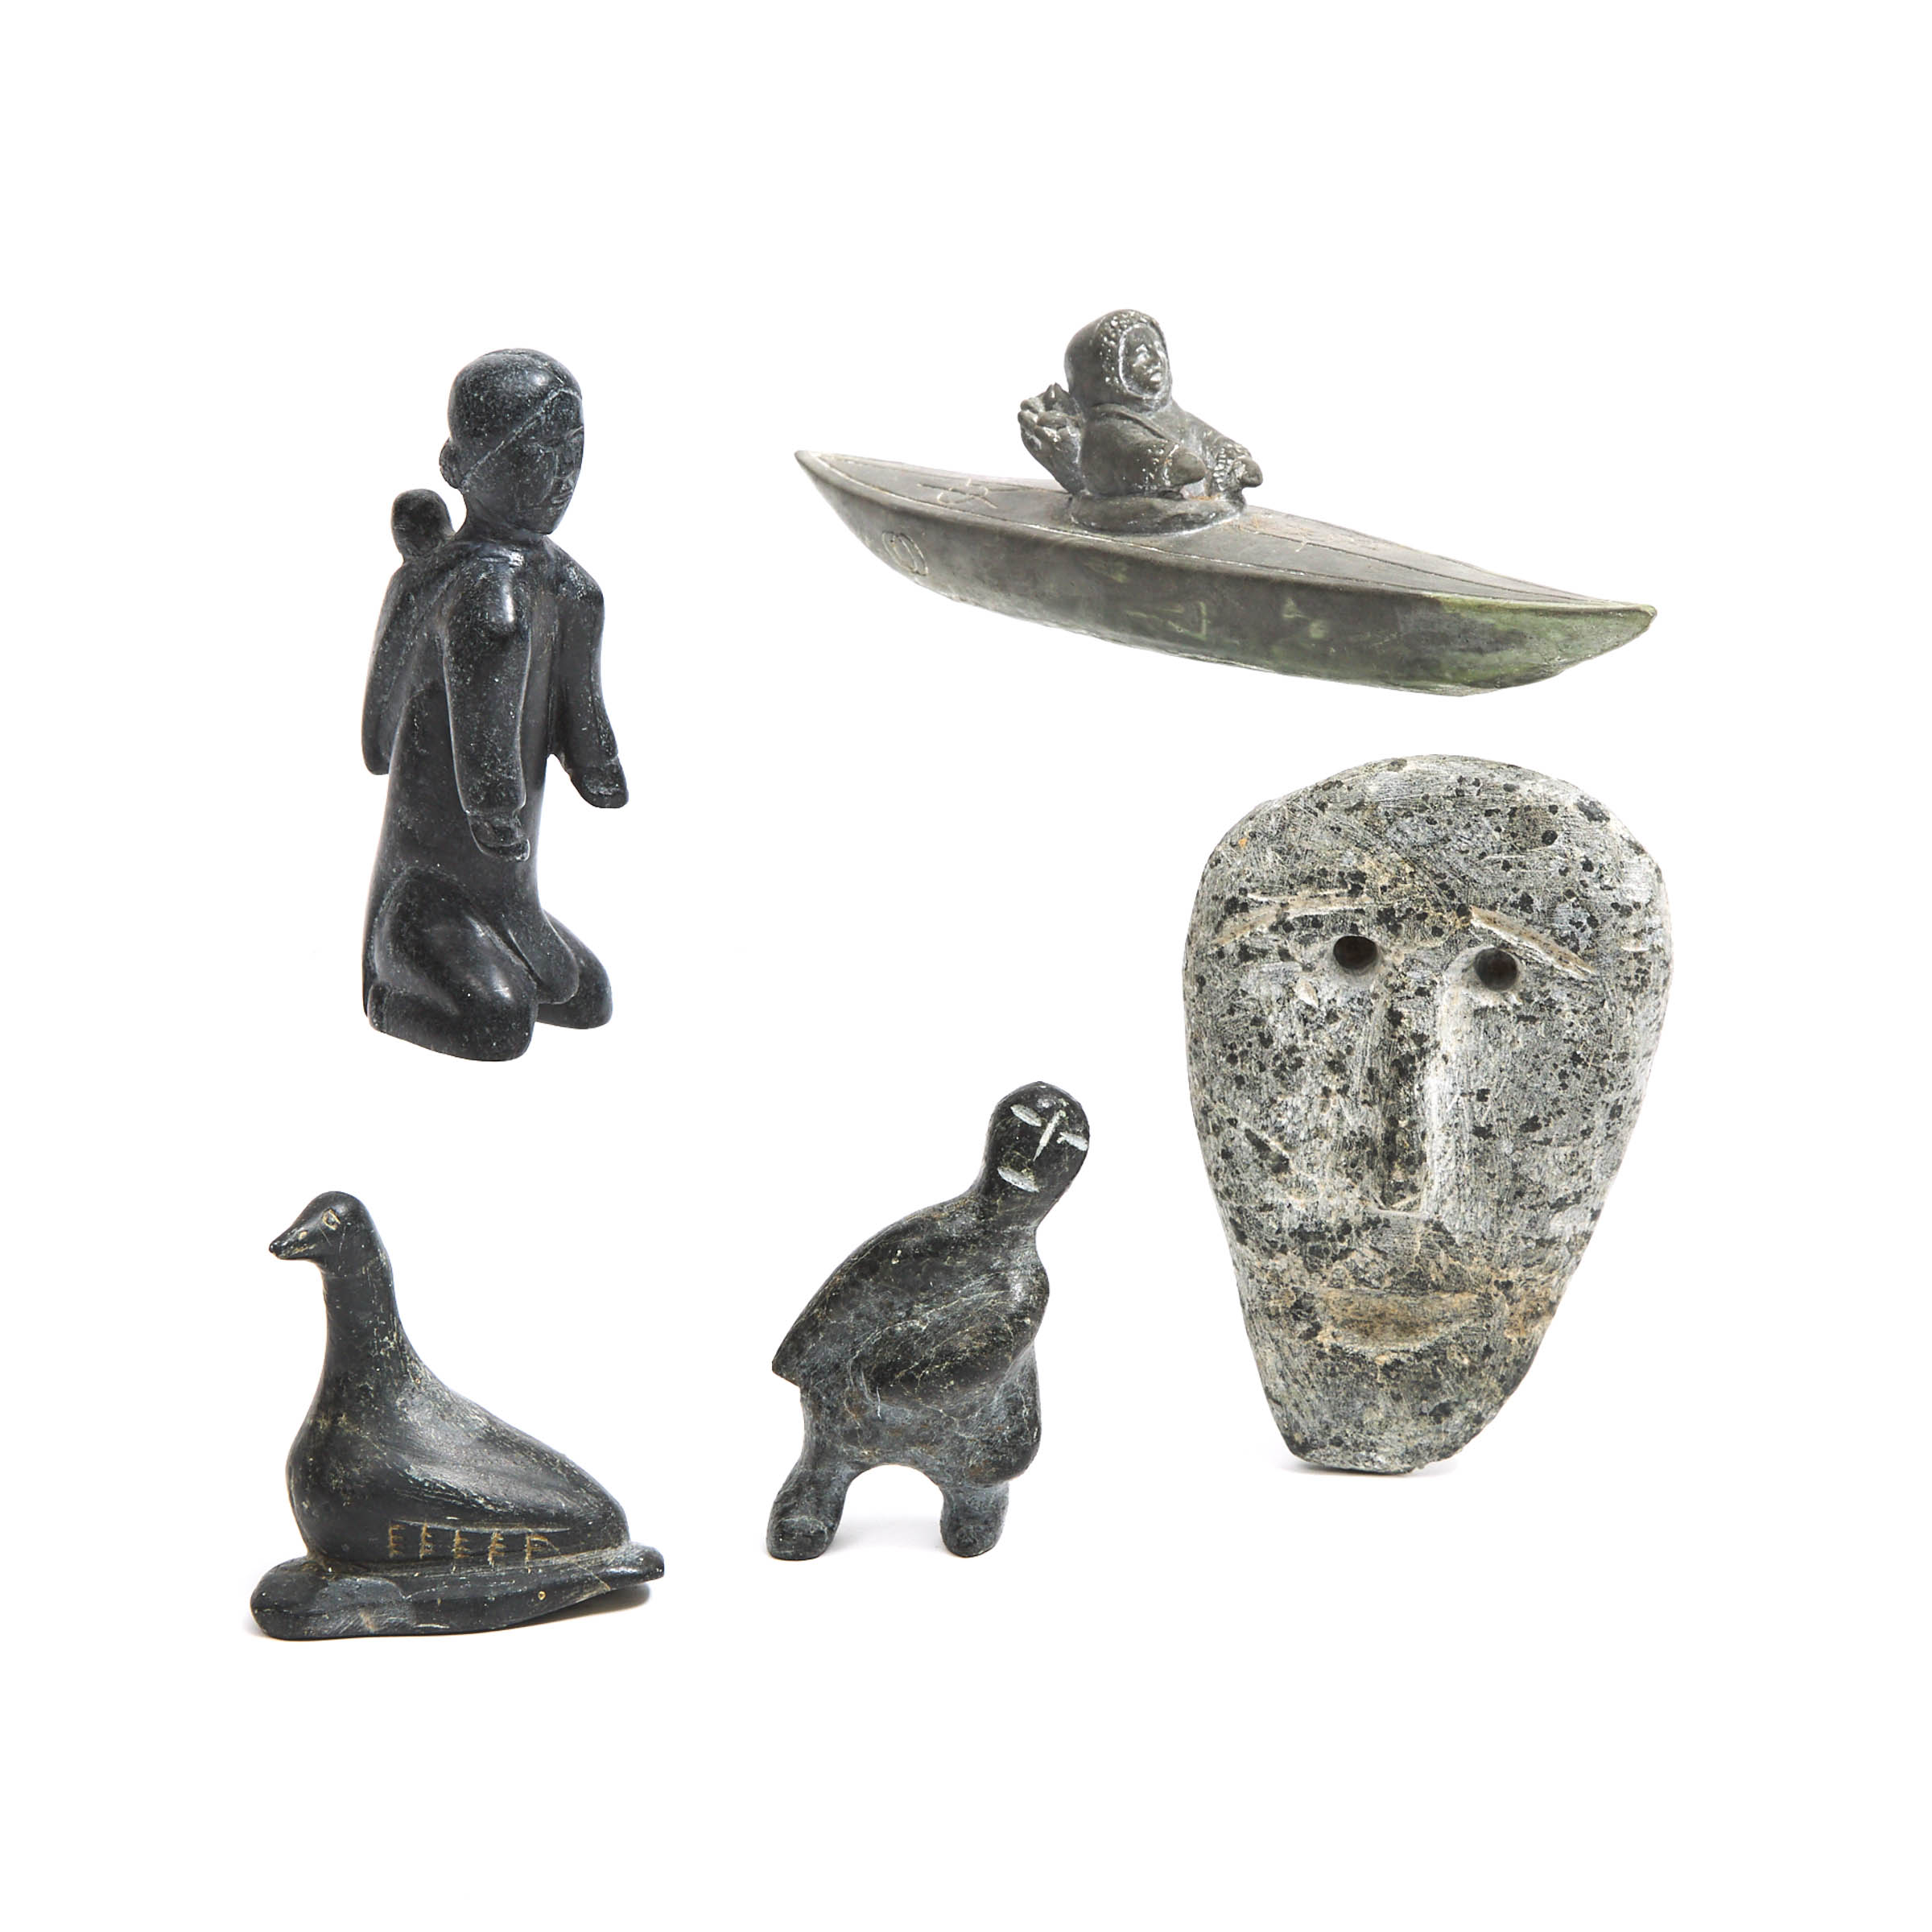 GROUP OF FIVE INUIT STONE CARVINGS